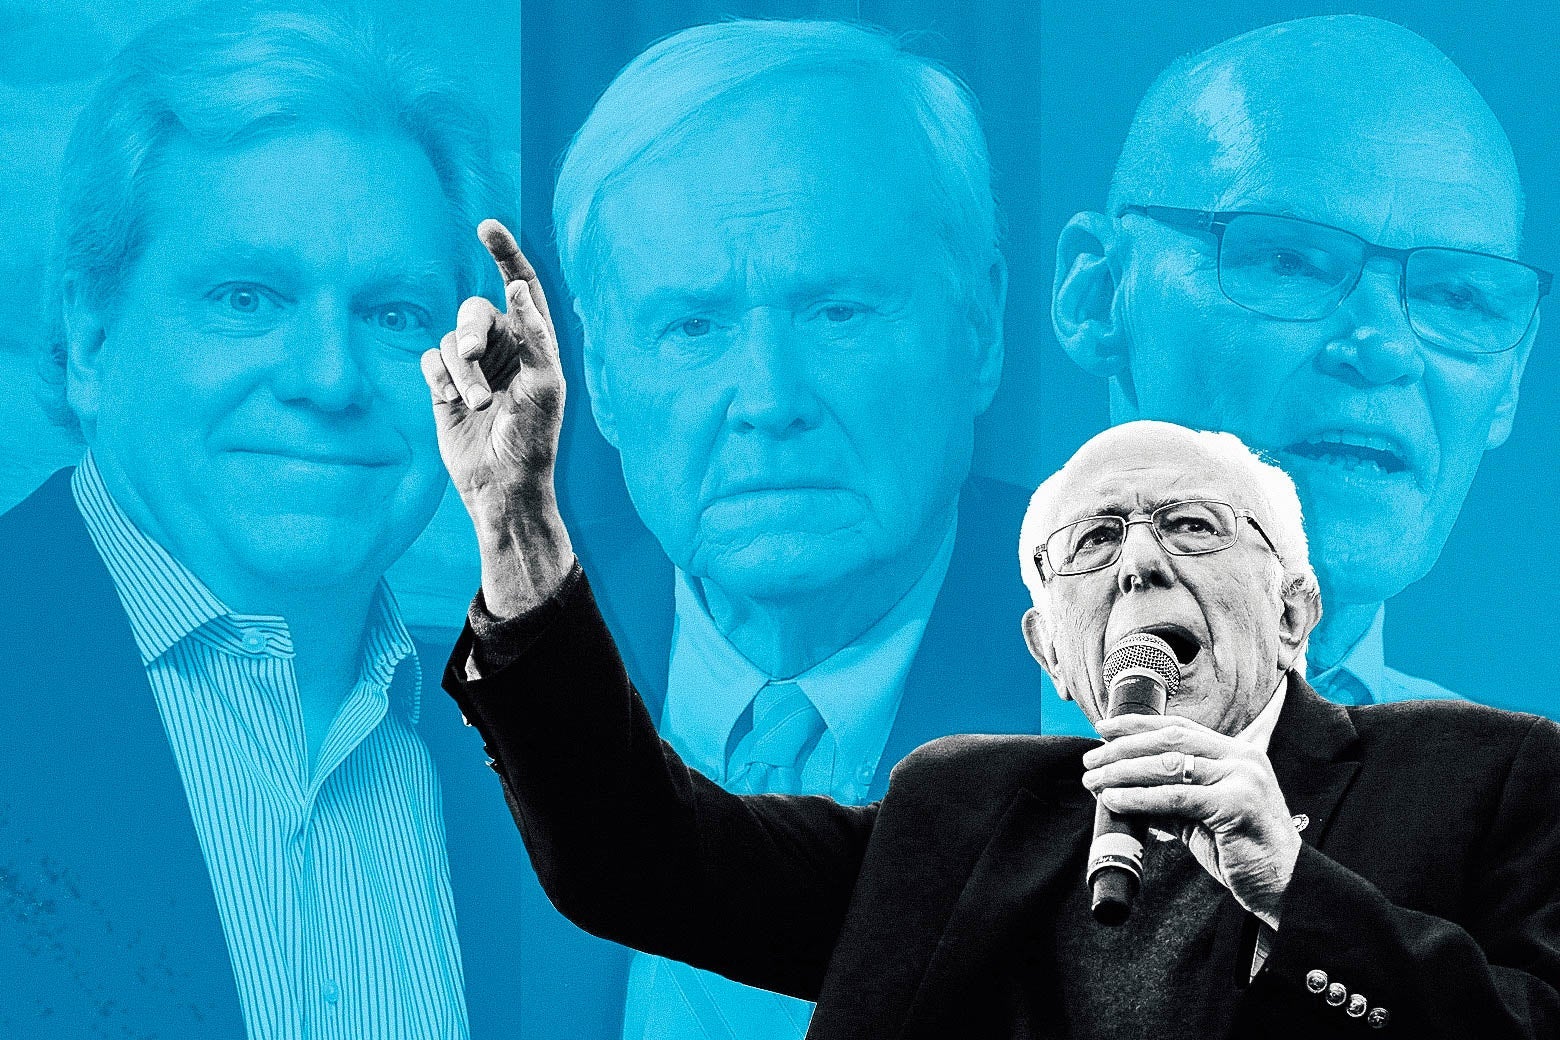 A photo of Sanders speaking and raising his finger, superimposed on a background of close-up shots of Lockhart, Matthews, and Carville.